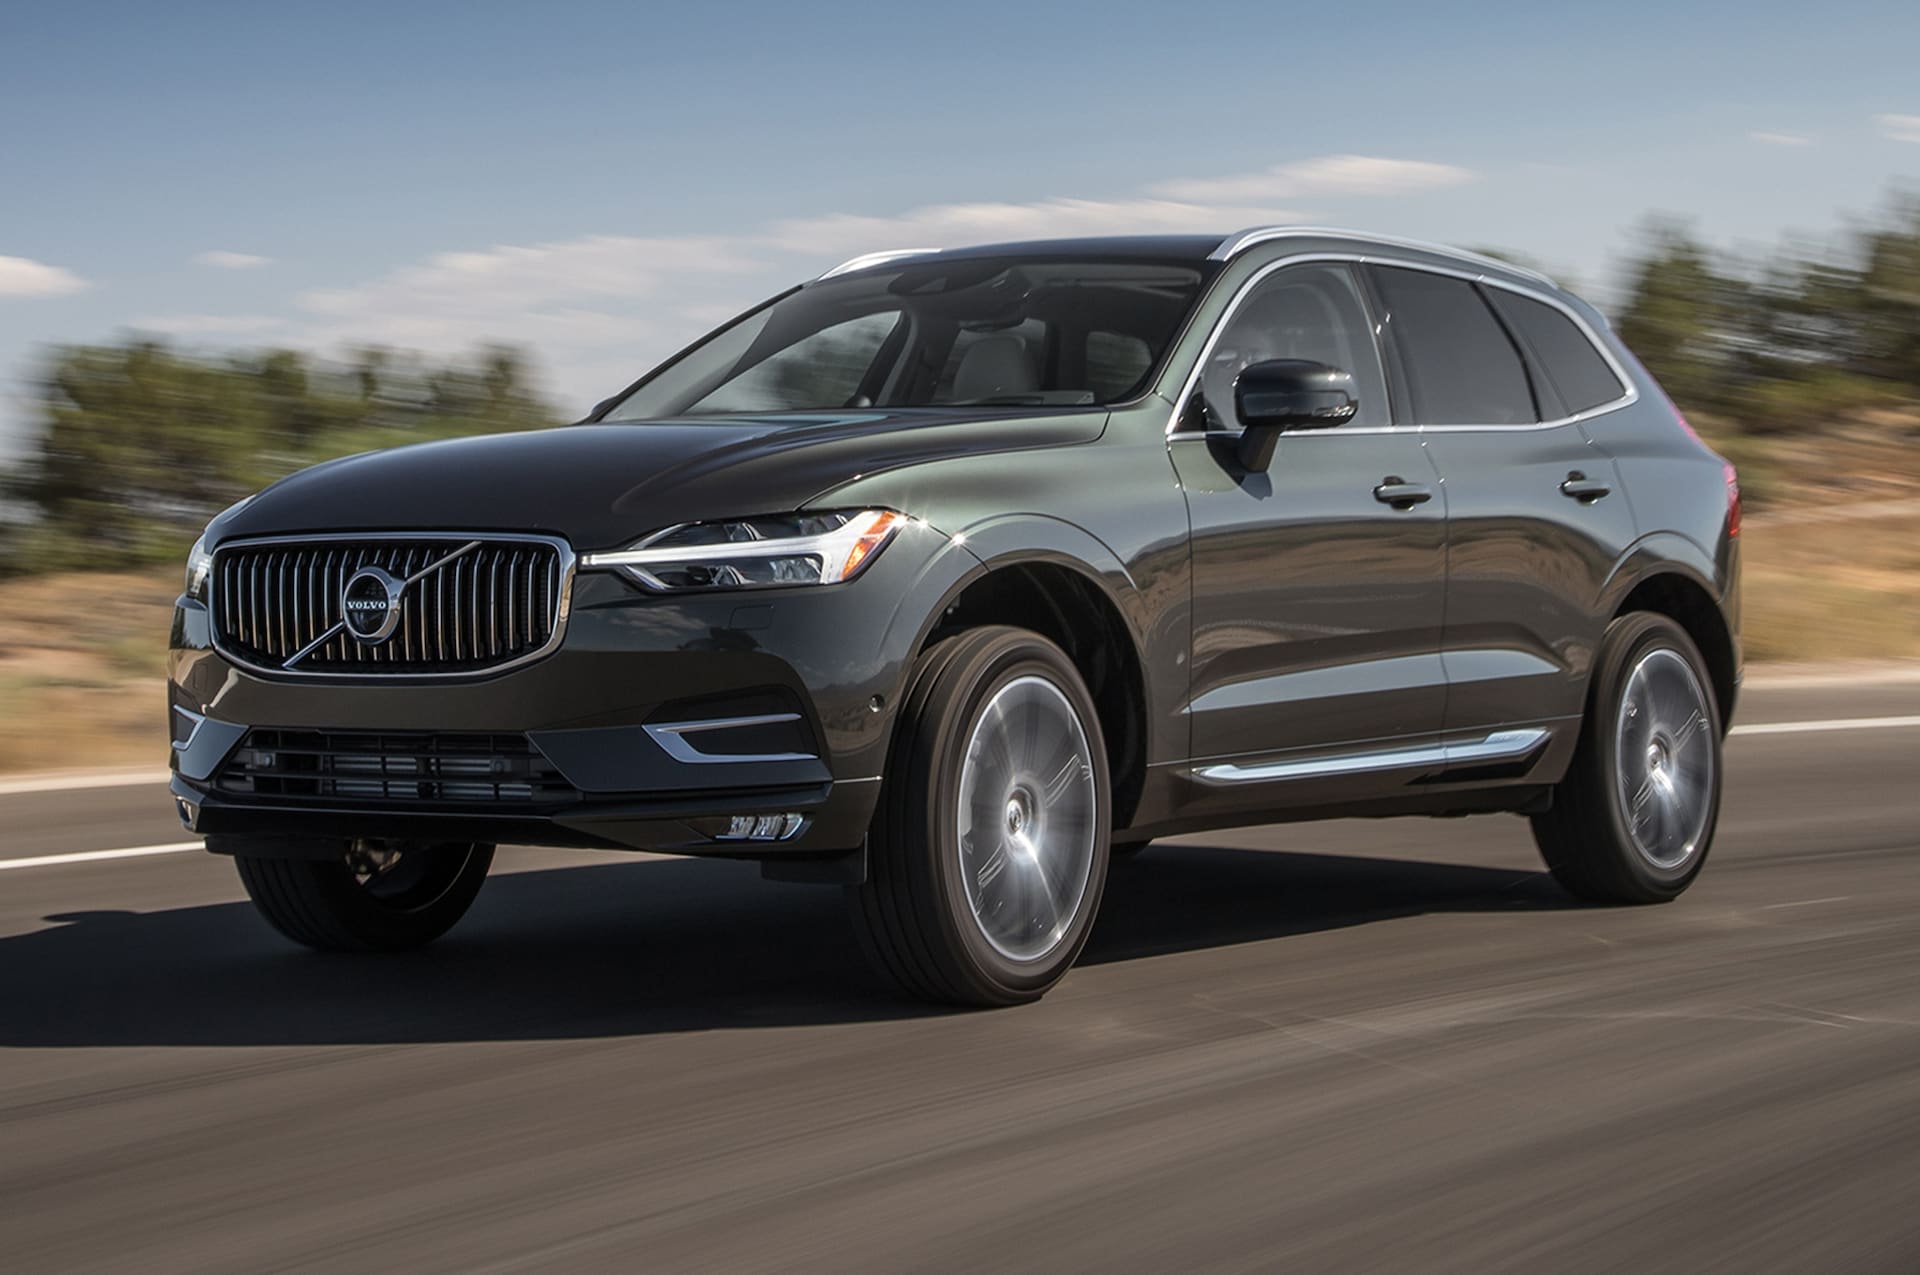 2018 Volvo XC60 T5 and T6 First Test Review